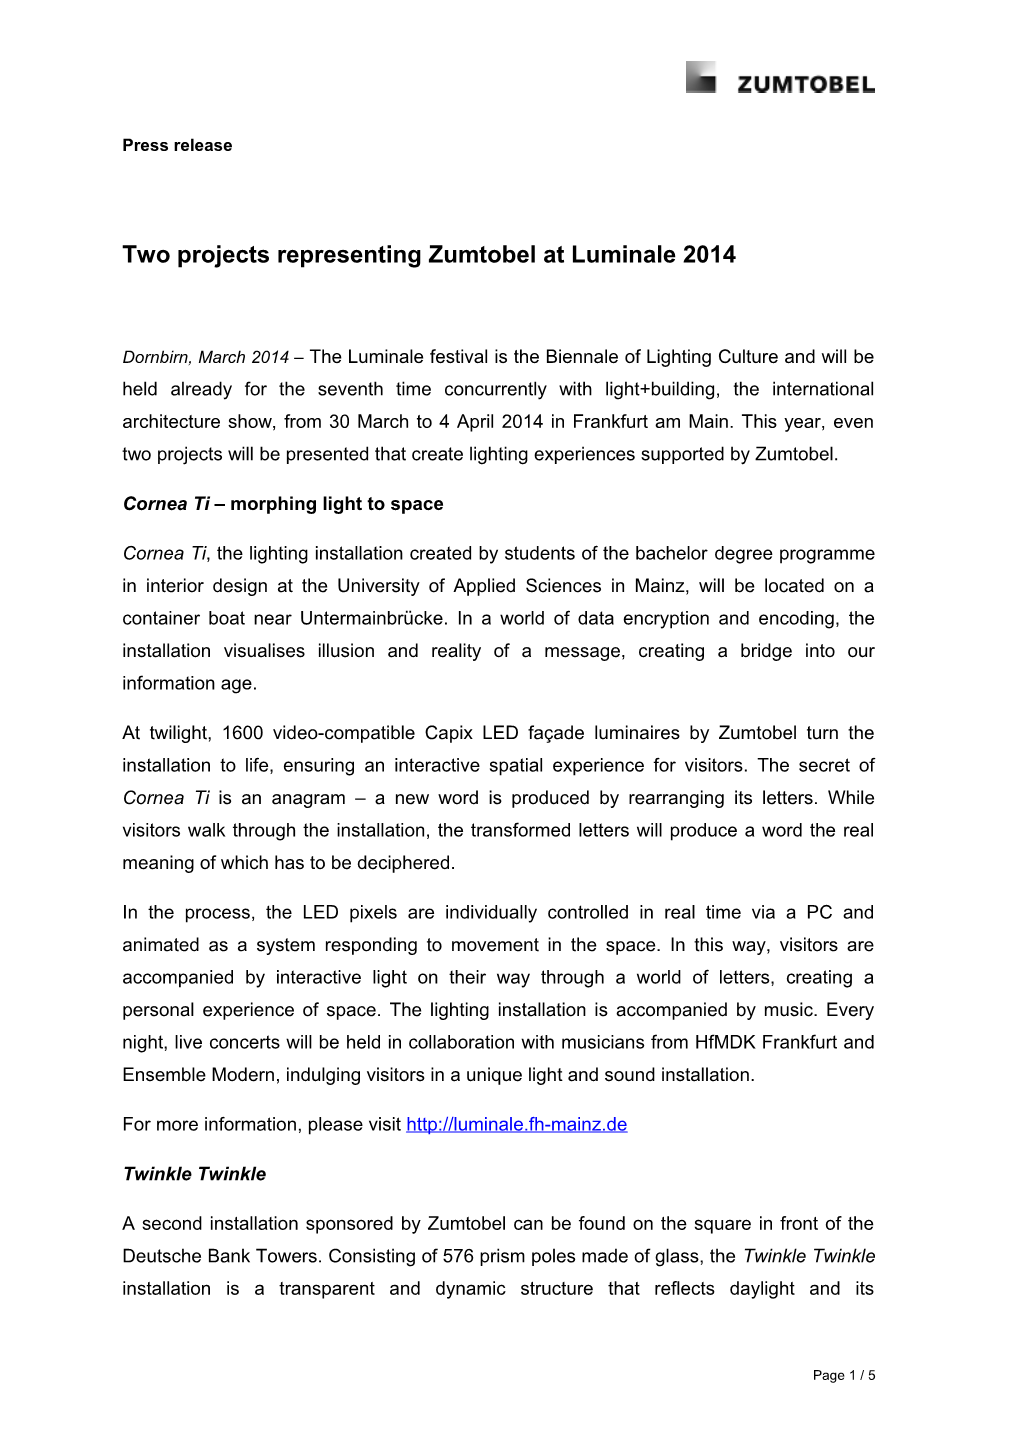 Two Projects Representing Zumtobel at Luminale 2014